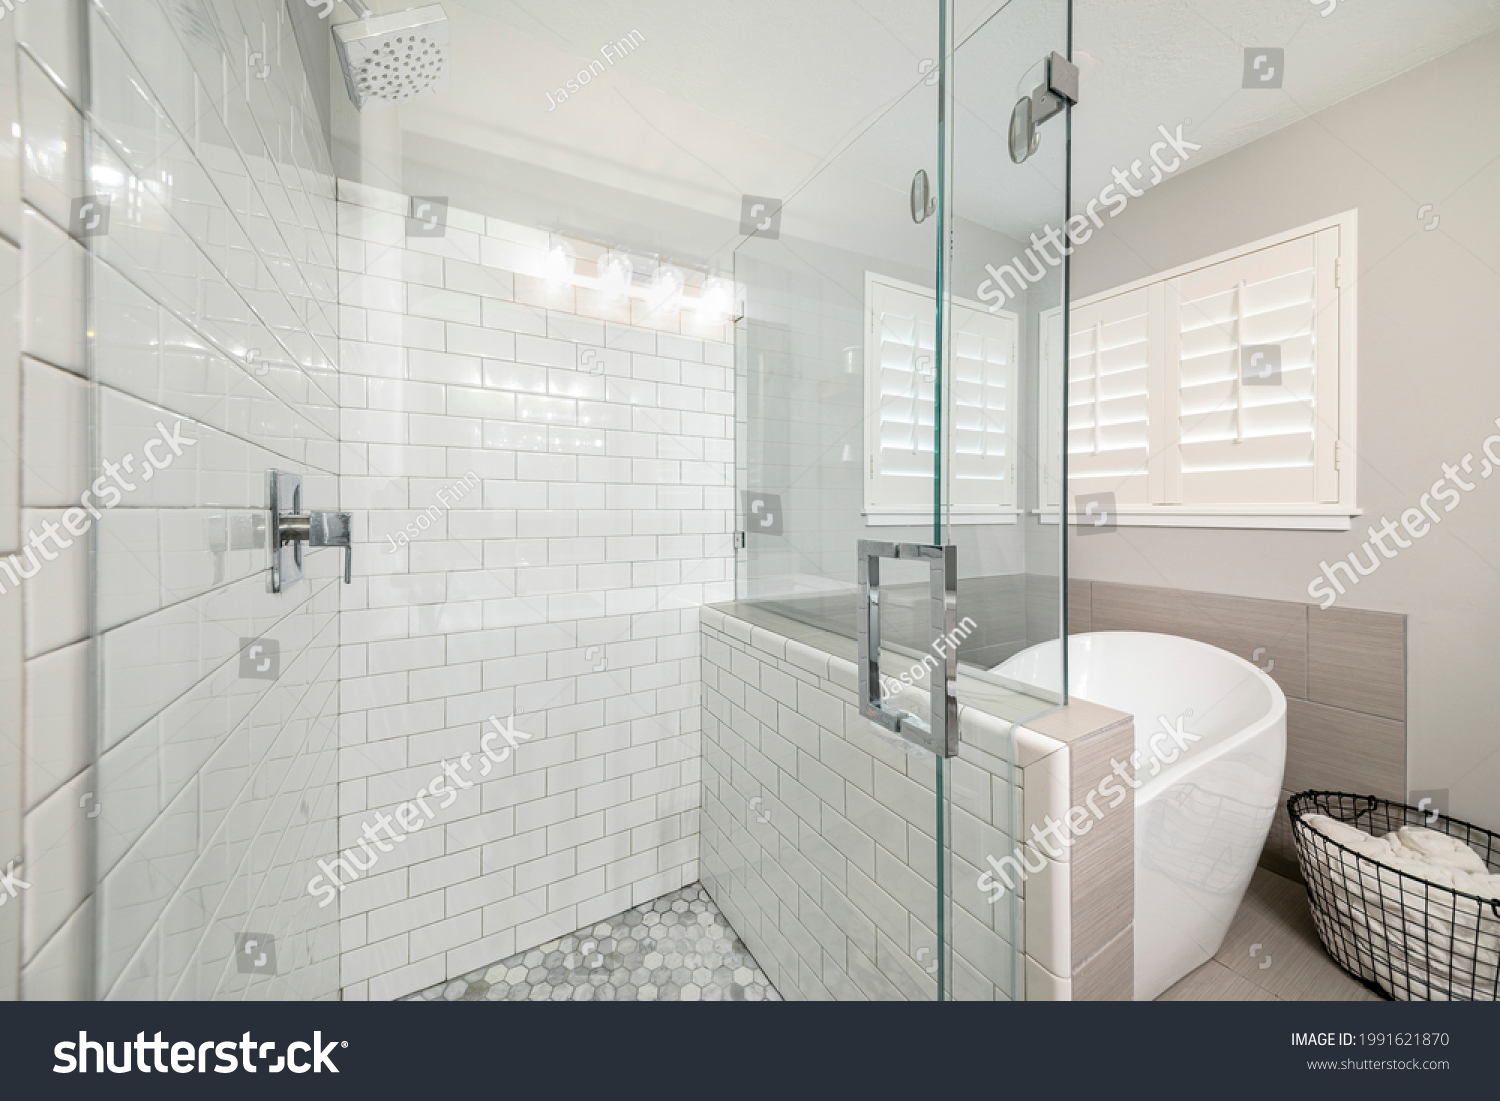 Bathroom interior with frameless shower stall and freestanding bathtub. Stall with subway tile walls and wall mounted shower head beside the tub with towel storage basket against the jalousie windows. #1991621870